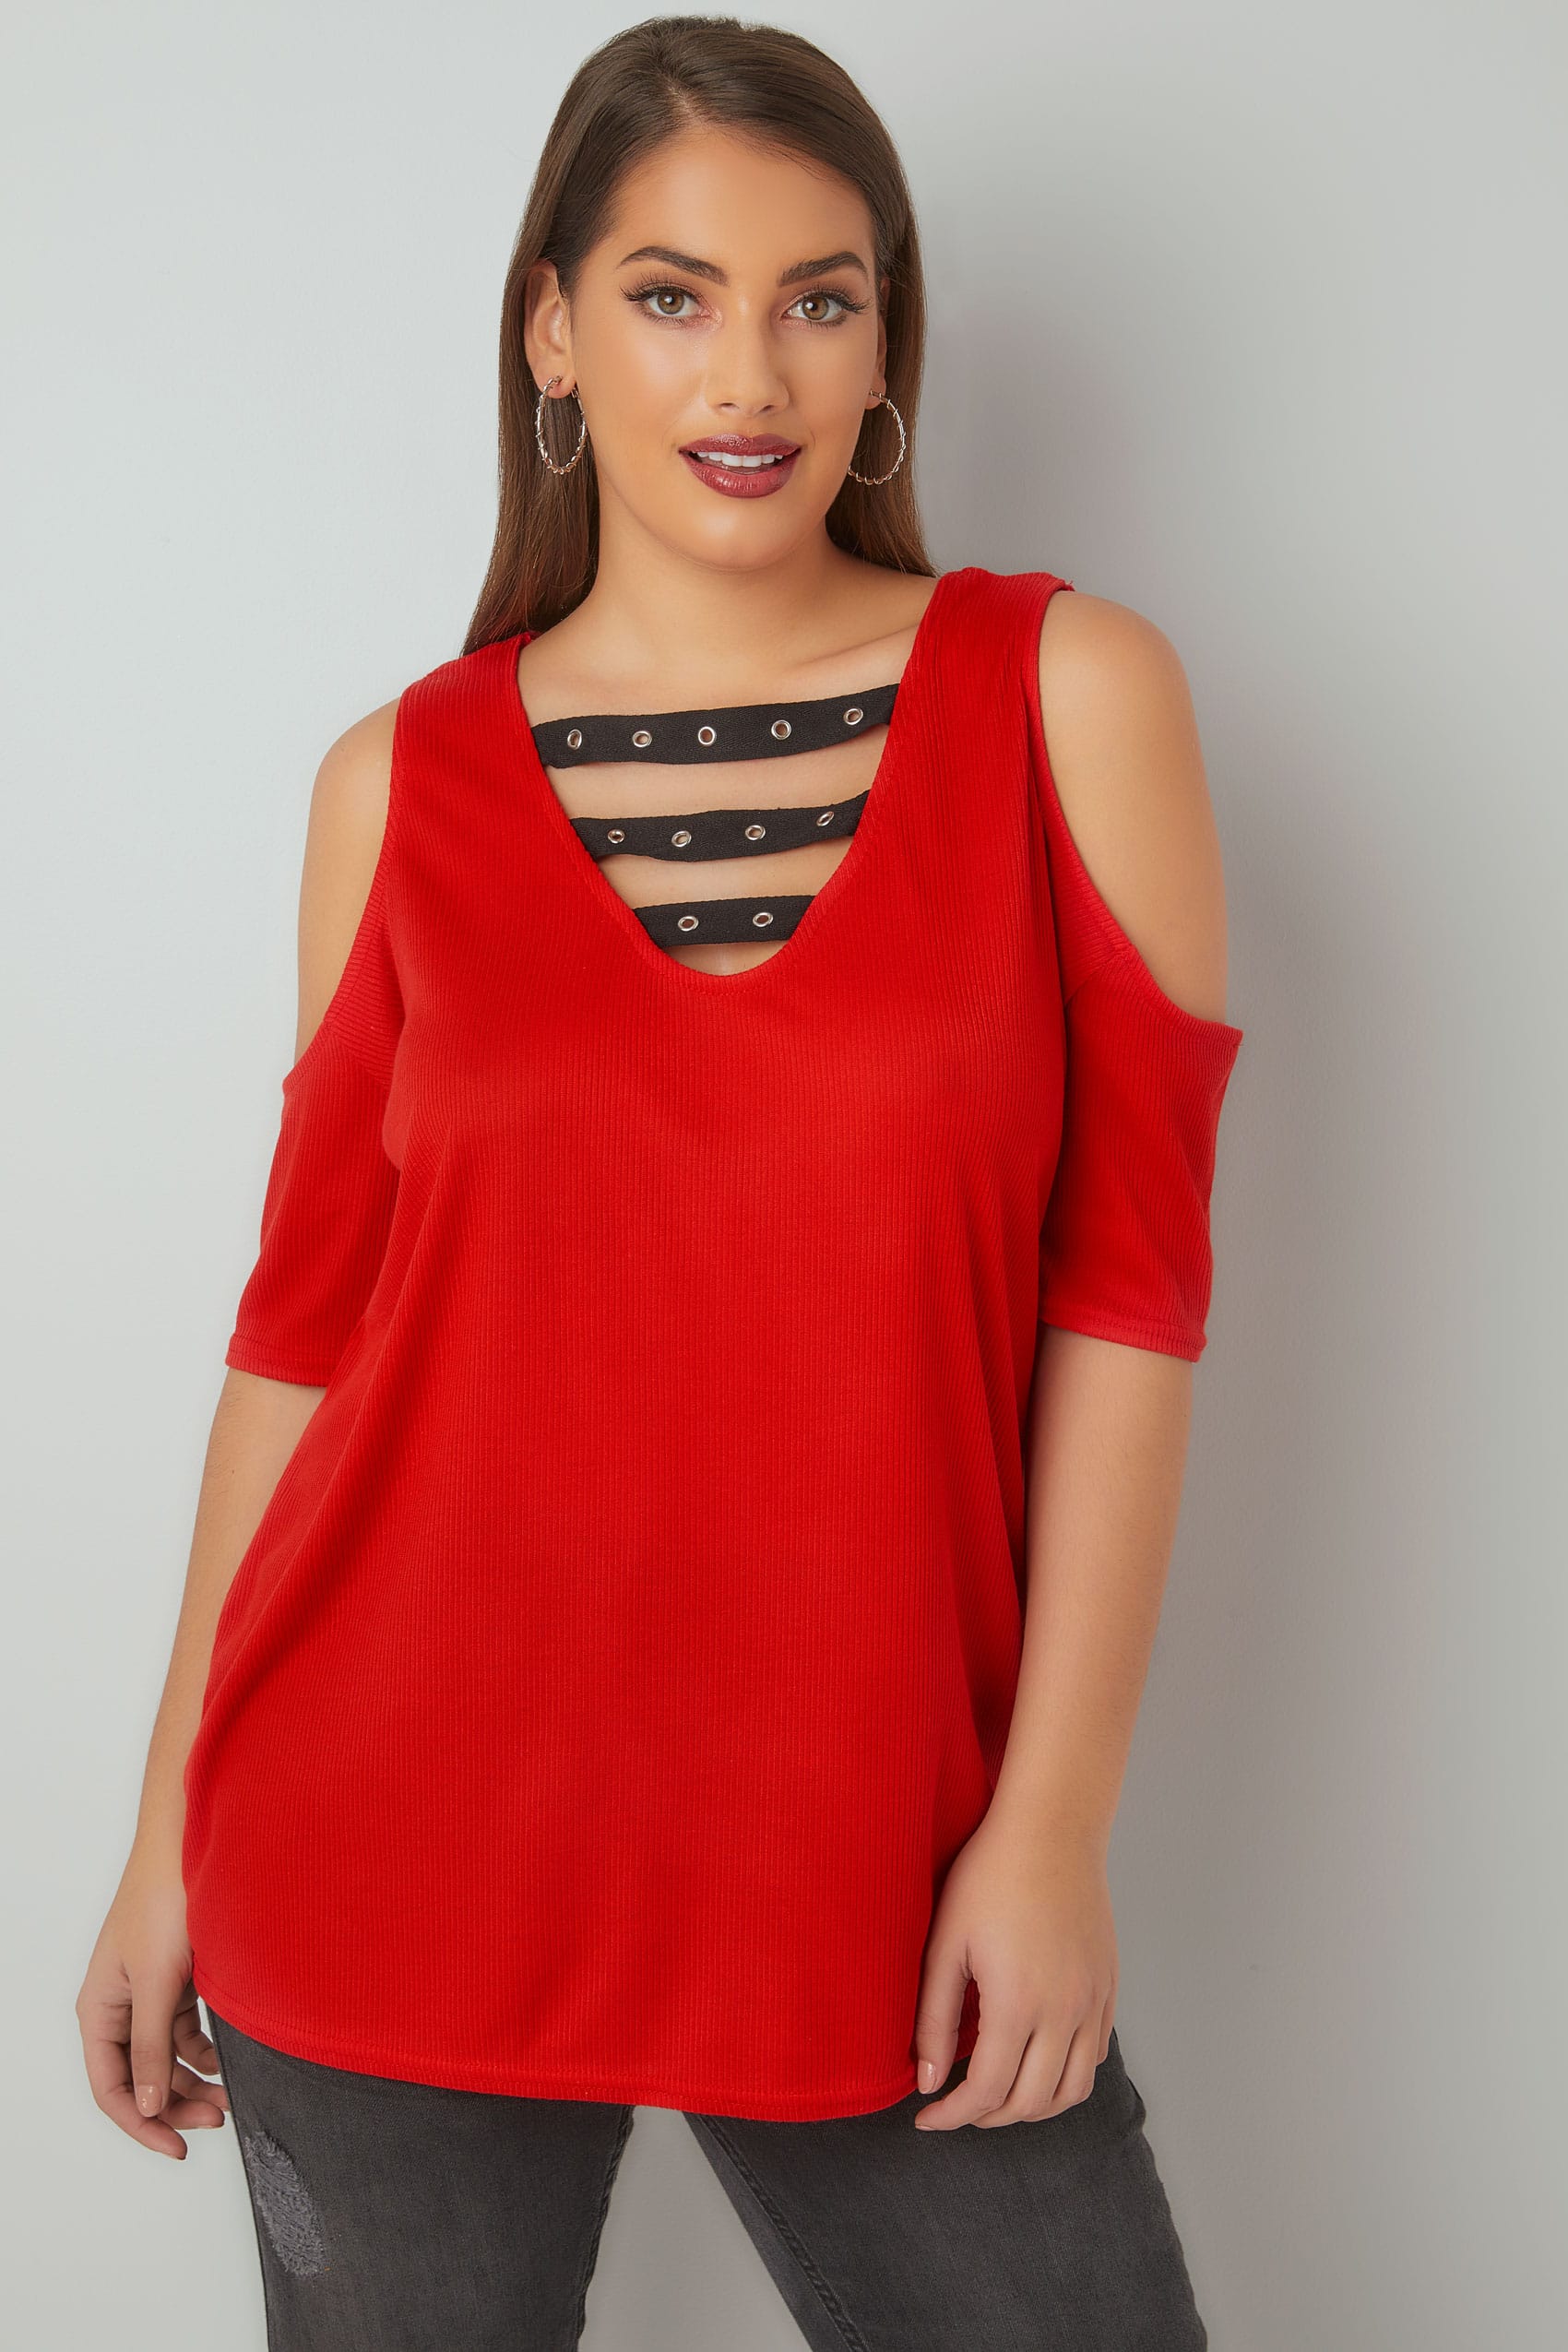 limited-collection-red-cold-shoulder-ribbed-top-with-eyelet-strap-detail-plus-size-16-to-32